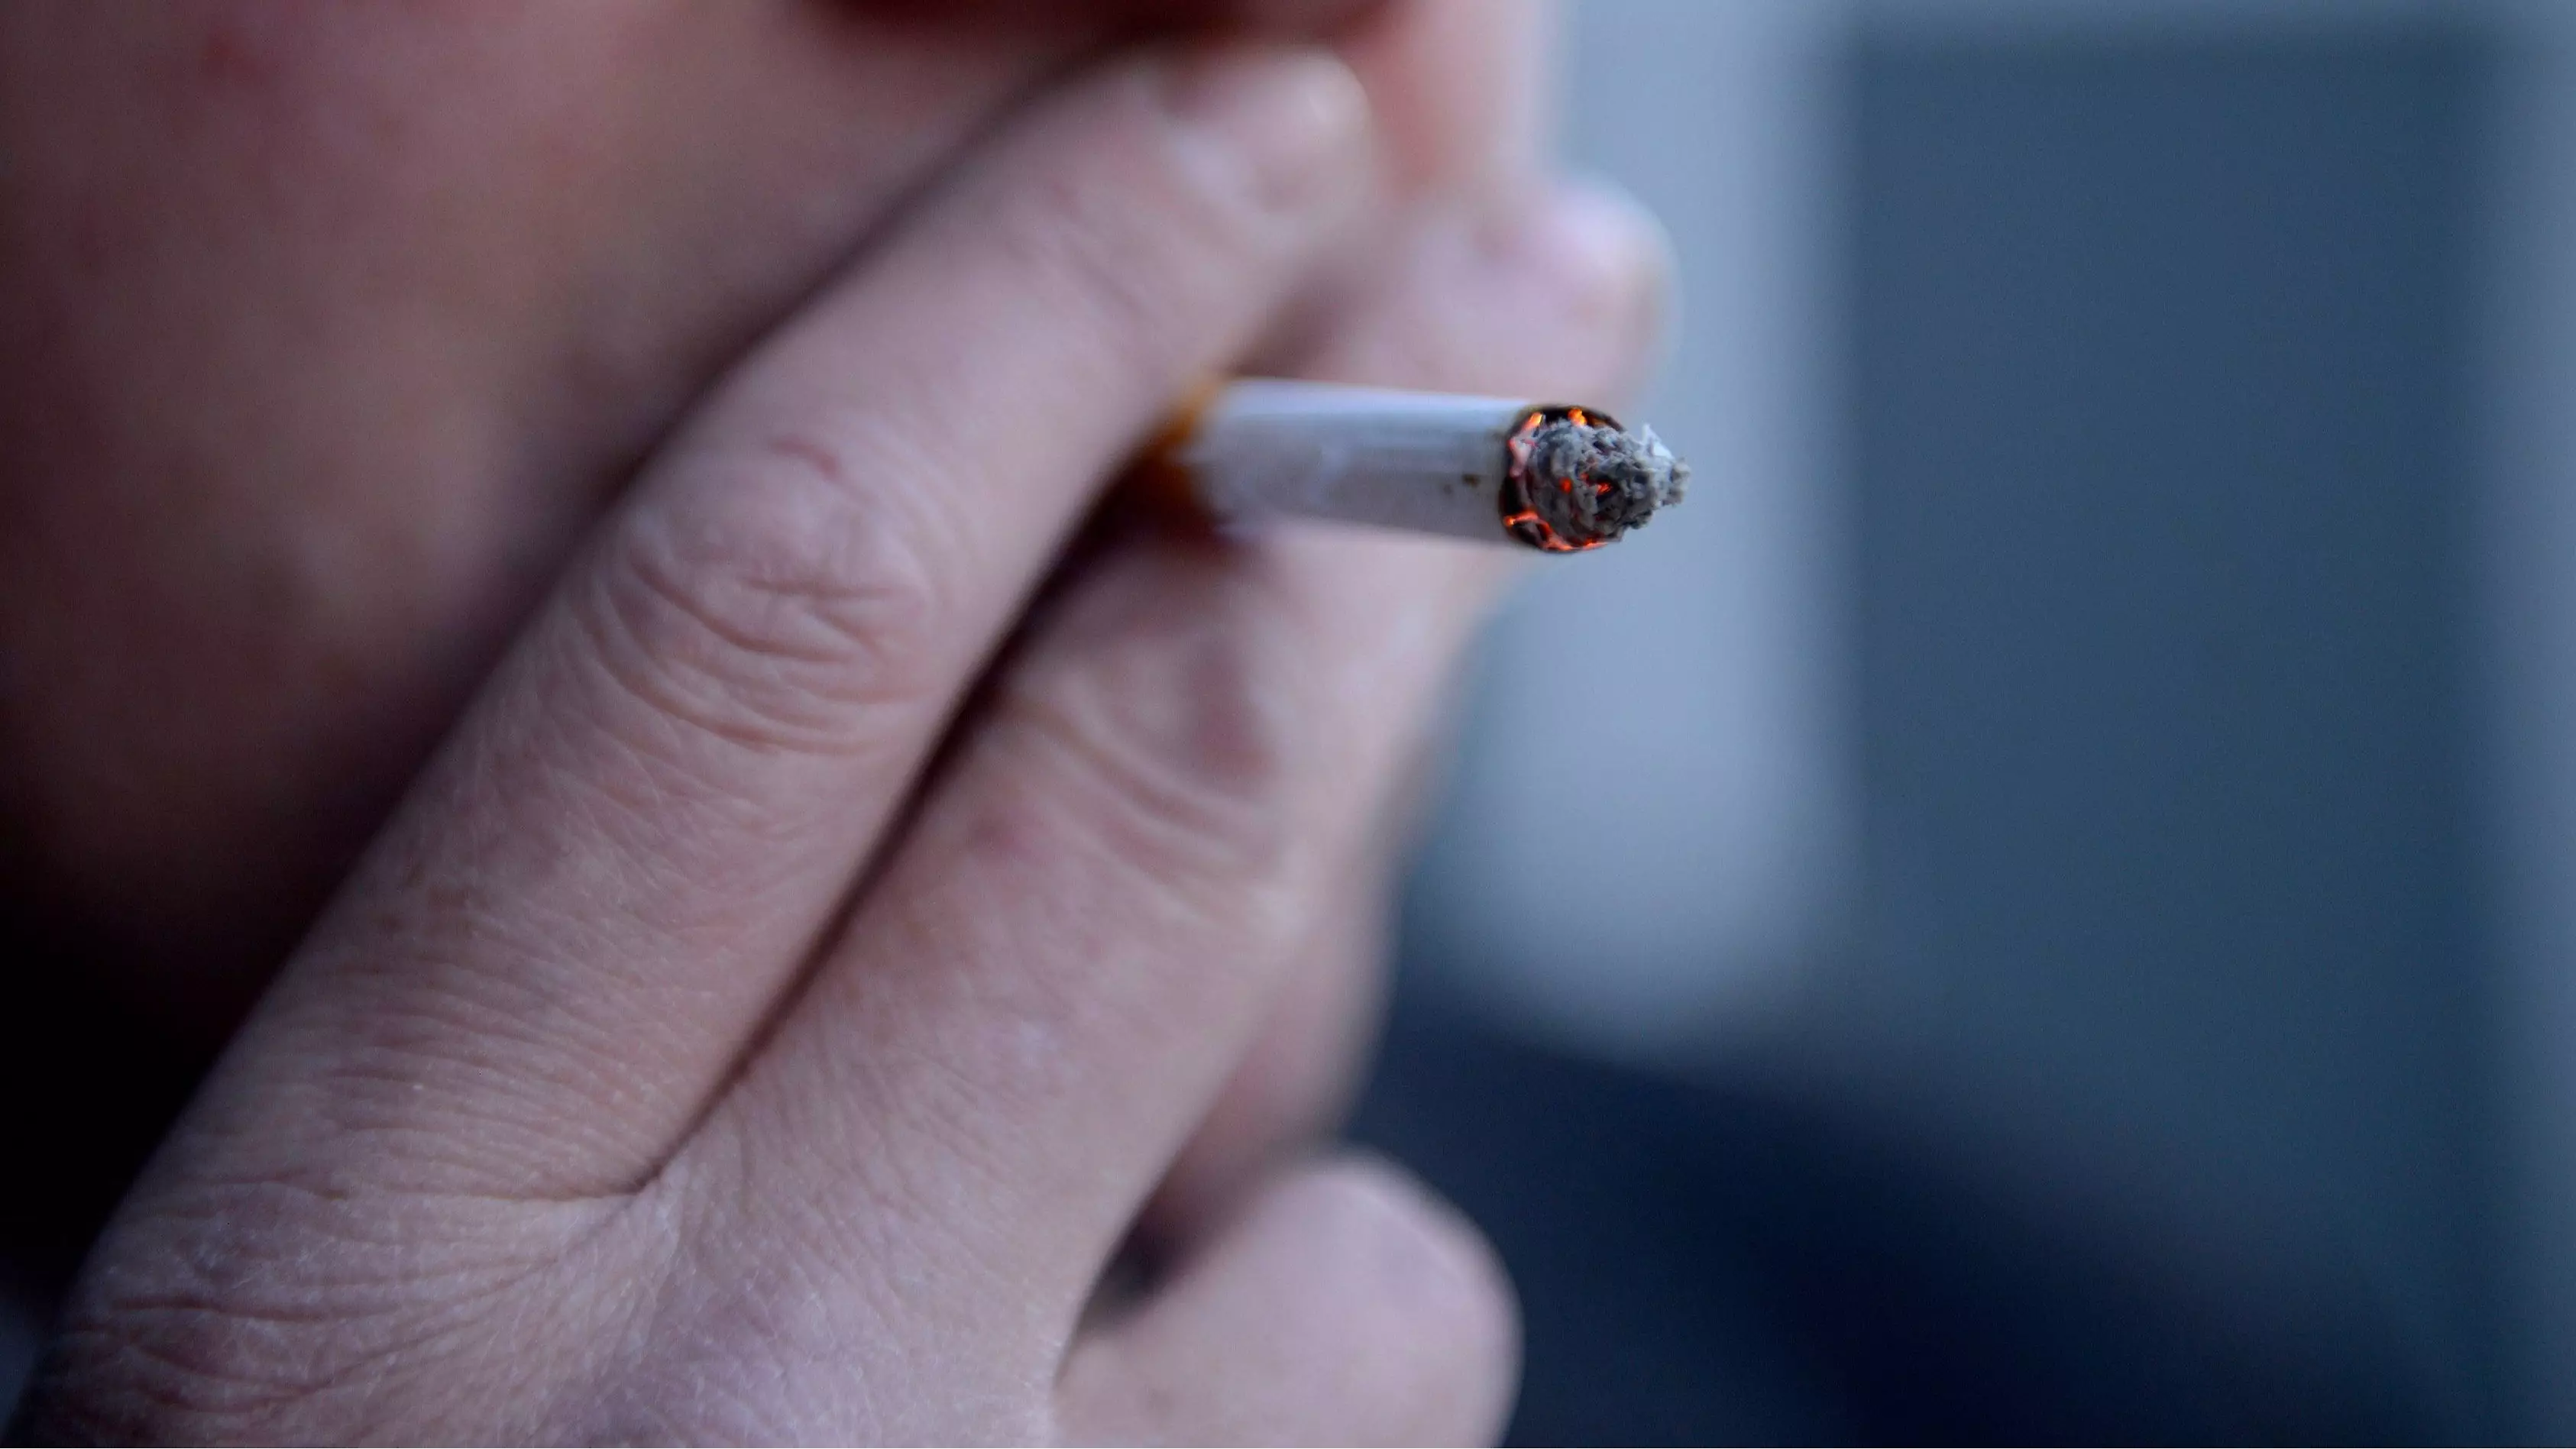 Smoking Should Be Banned To All Under 21s Around The World, Experts Say